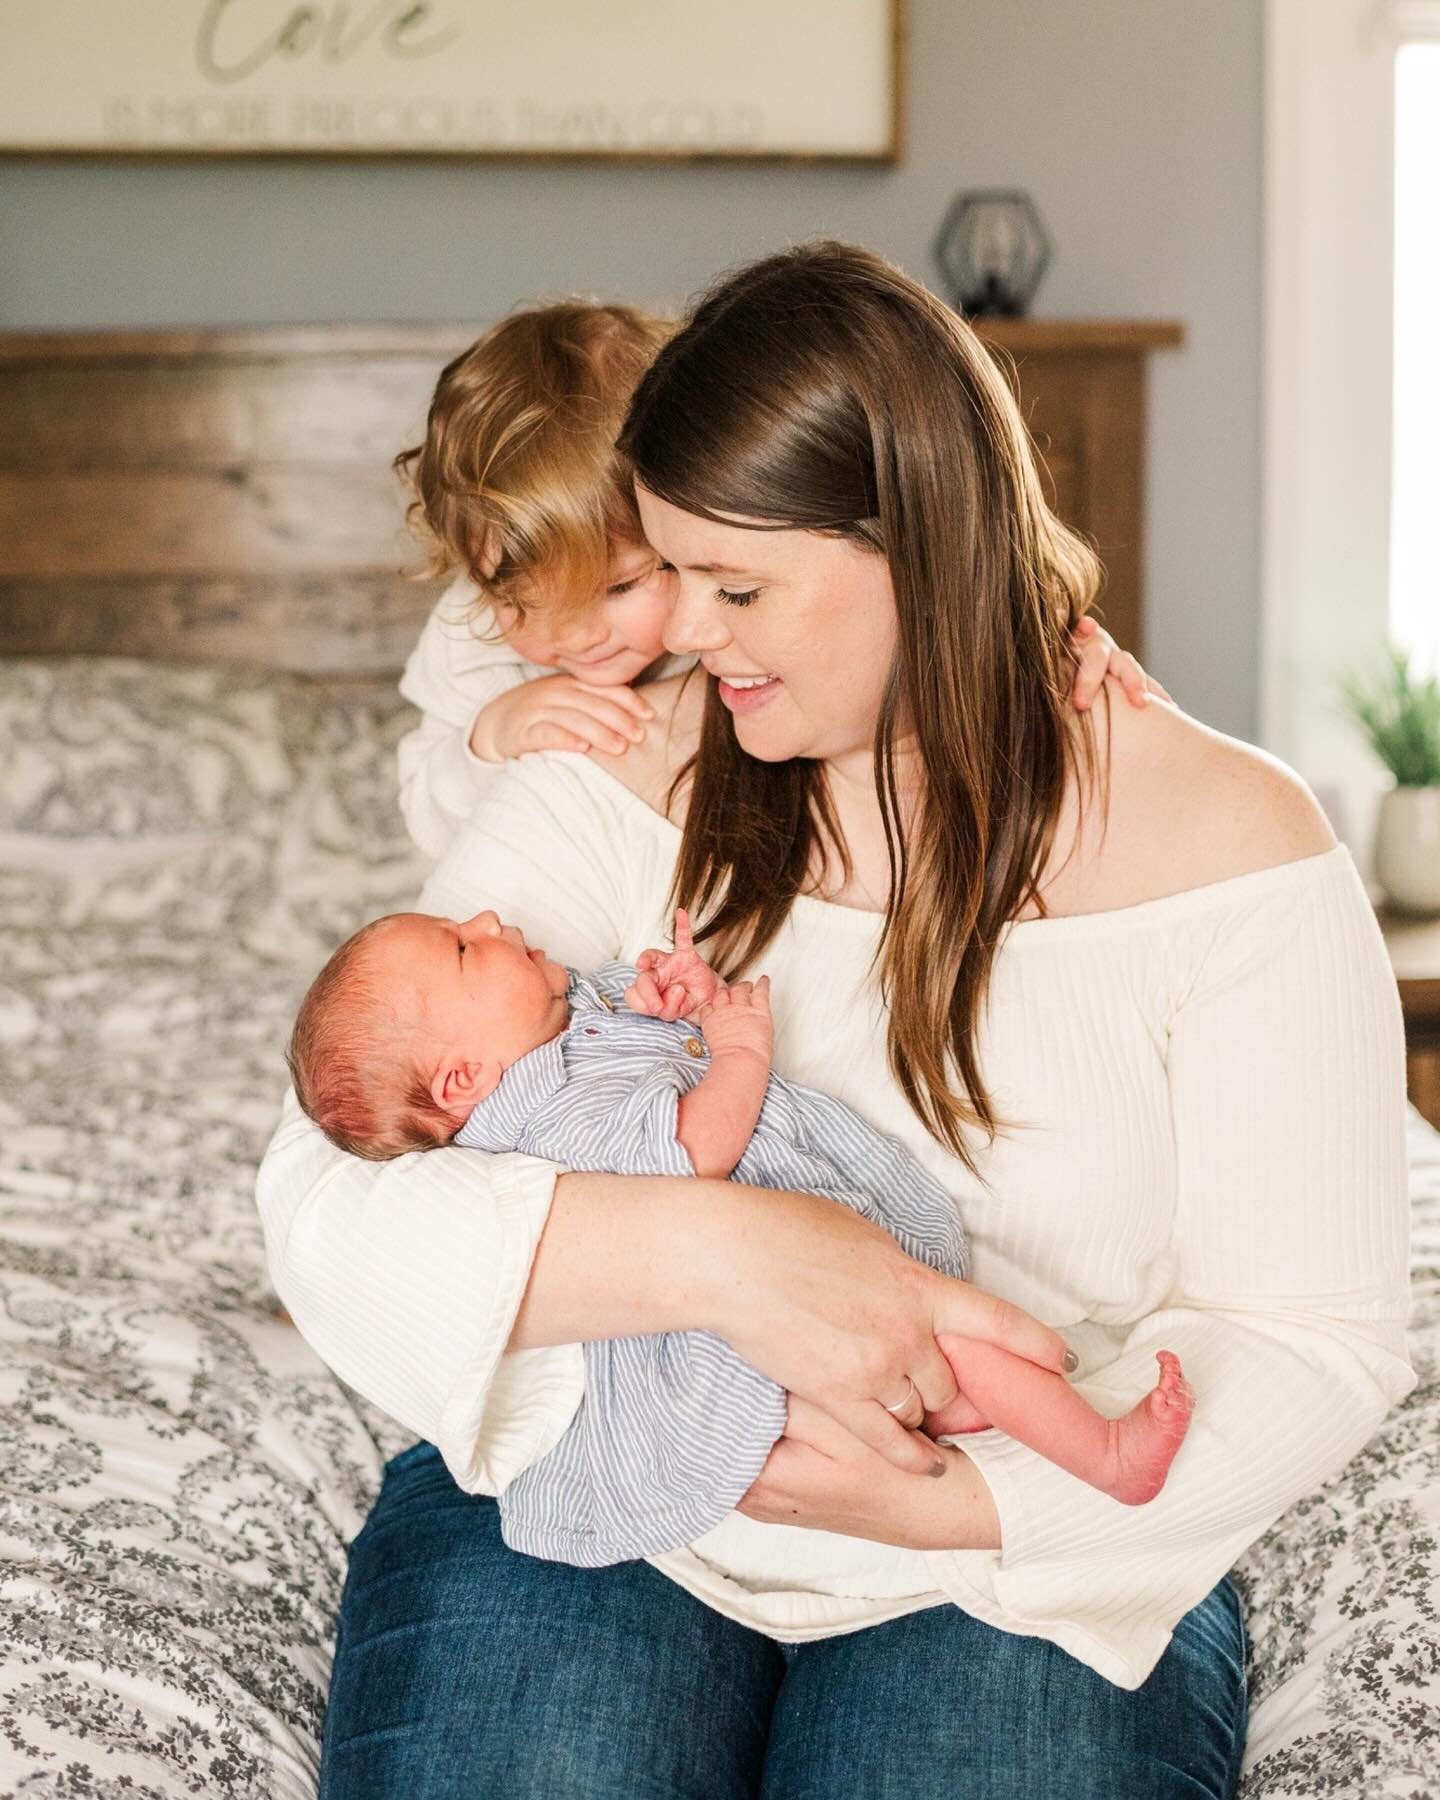 Everley 🌸

Capturing precious moments with beloved clients turned friends is truly heartwarming. I love seeing their little family grow! Welcome to the world, sweet girl! 💕